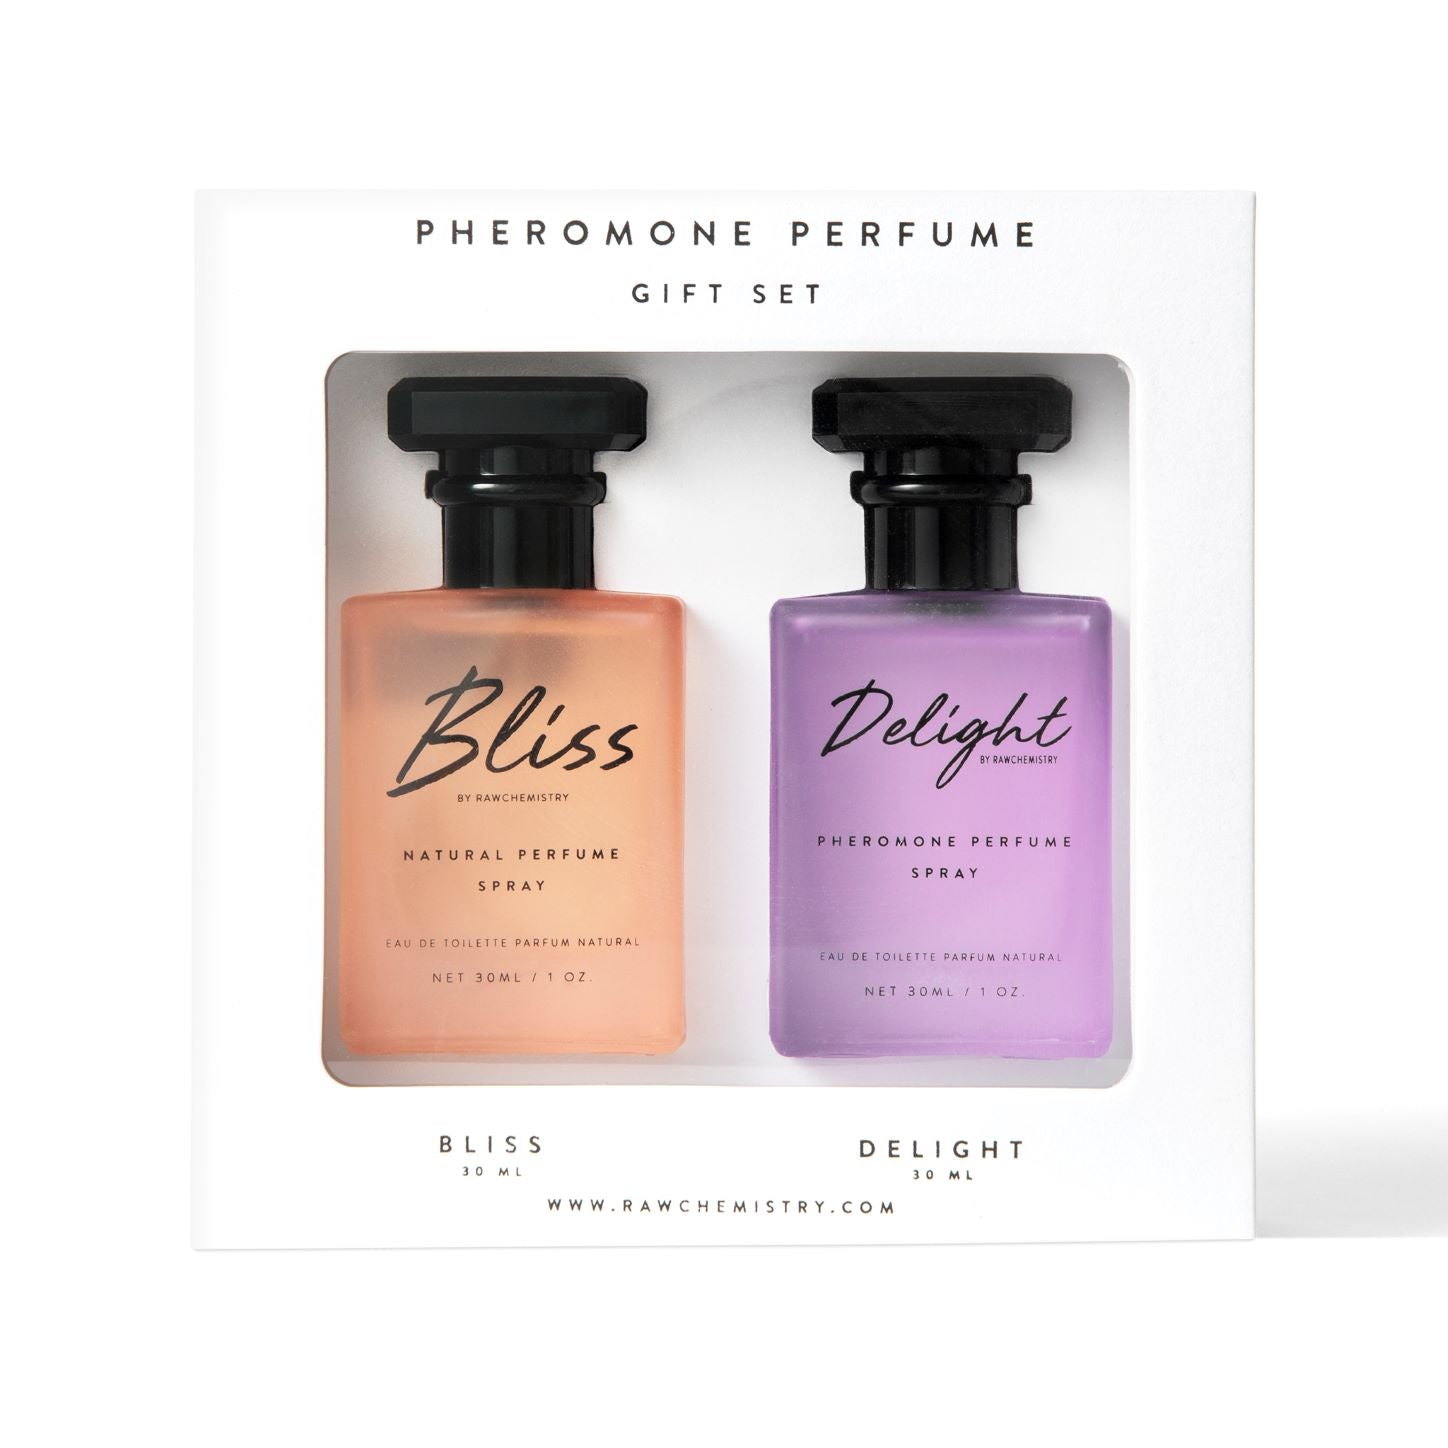 RawChemistry Bliss and Delight a Pheromone Perfume Gift Set